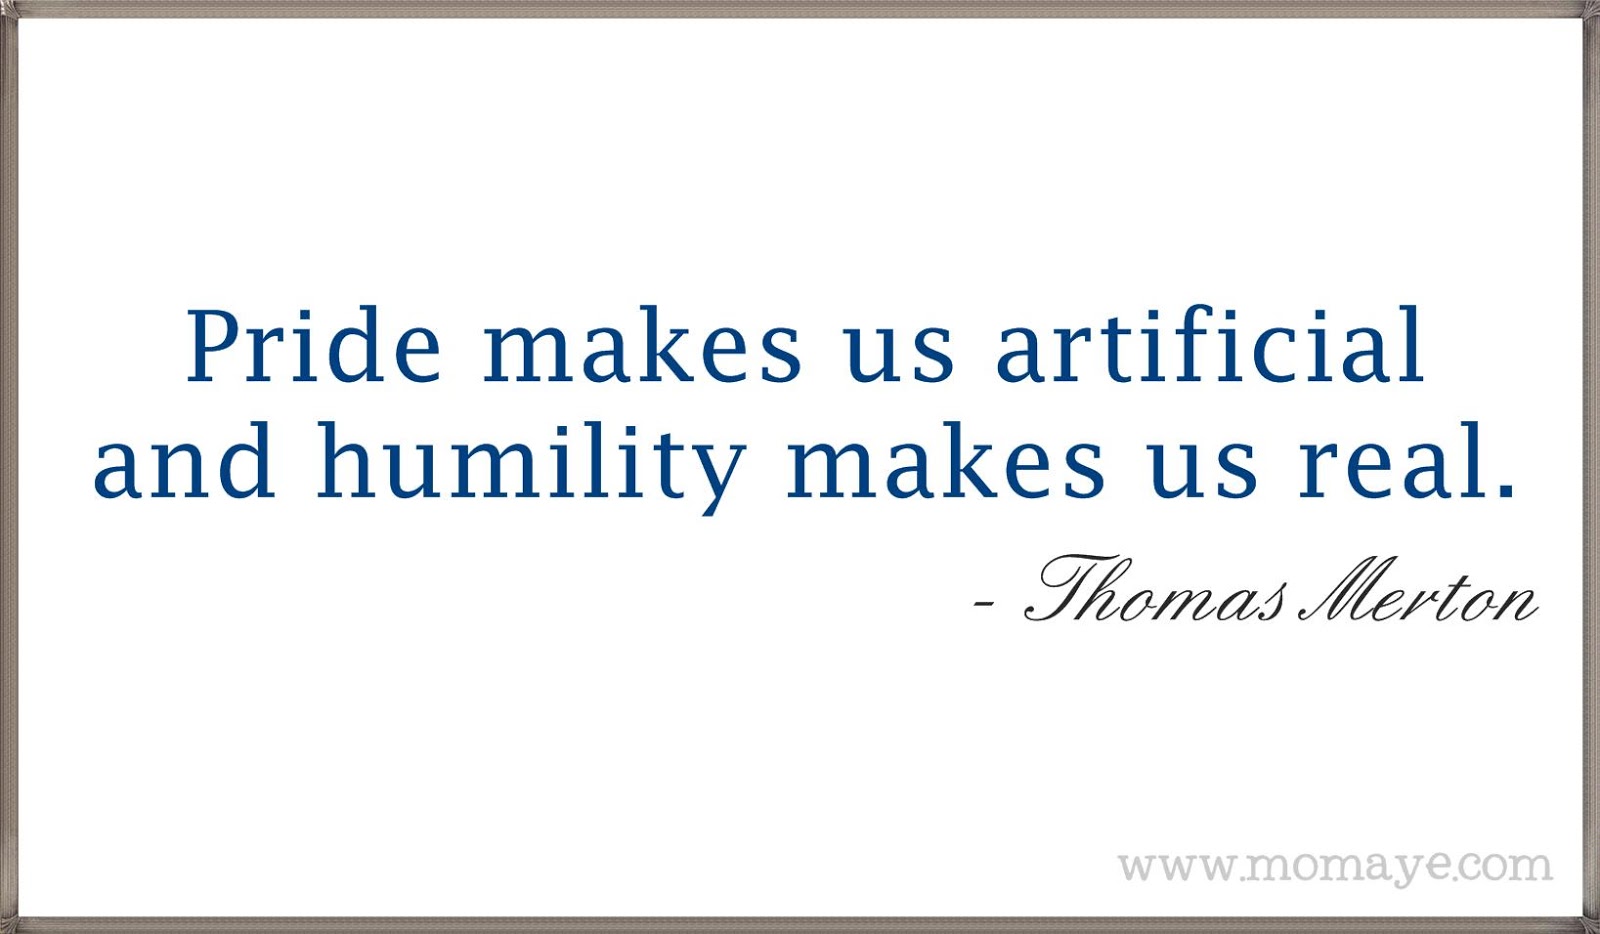 Bible Quotes About Humility. QuotesGram